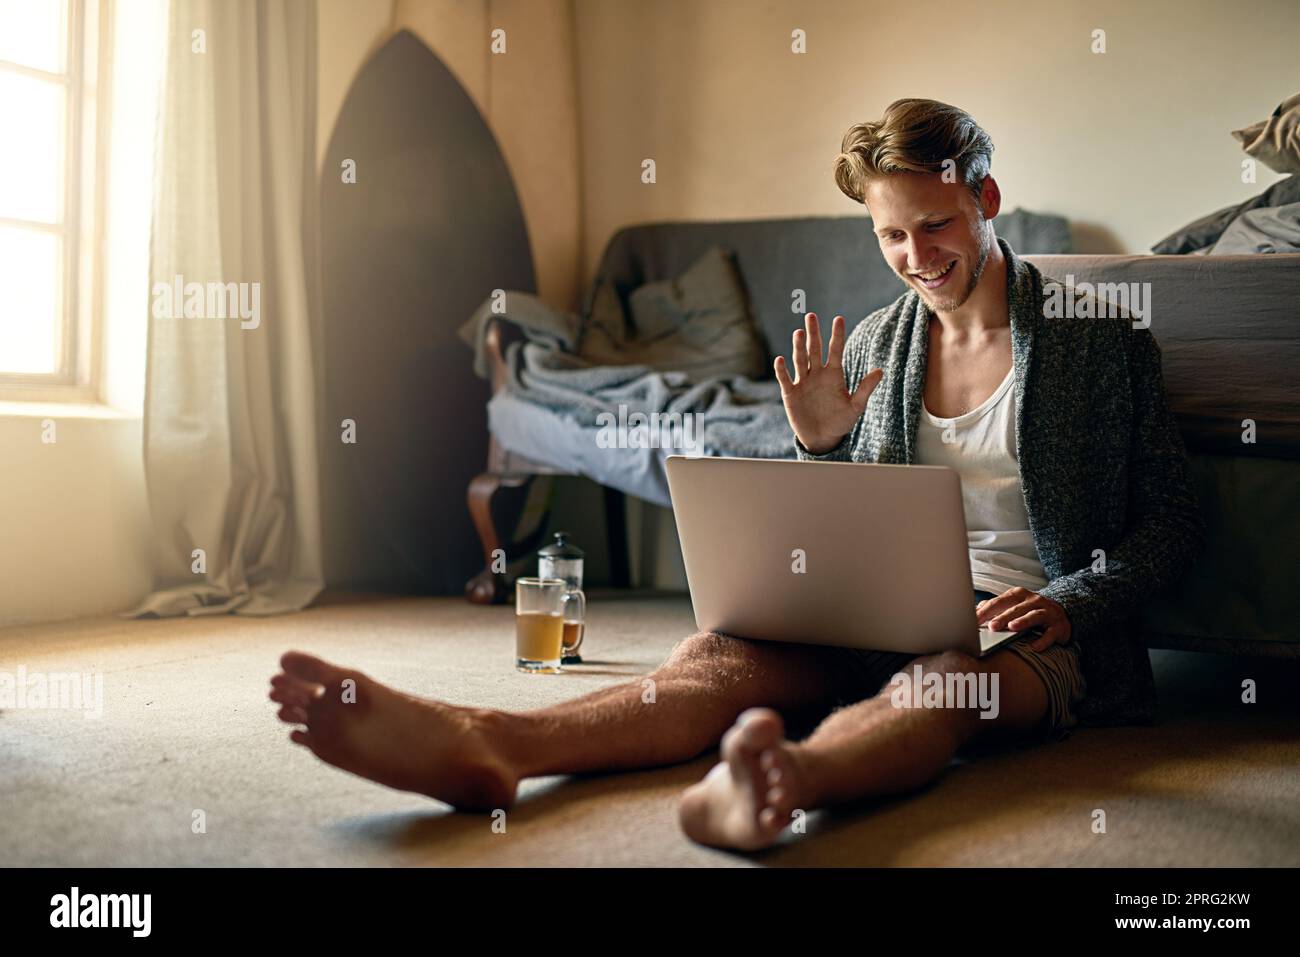 Stay close and connected to those you care about. a young man making a video call on his laptop at home. Stock Photo